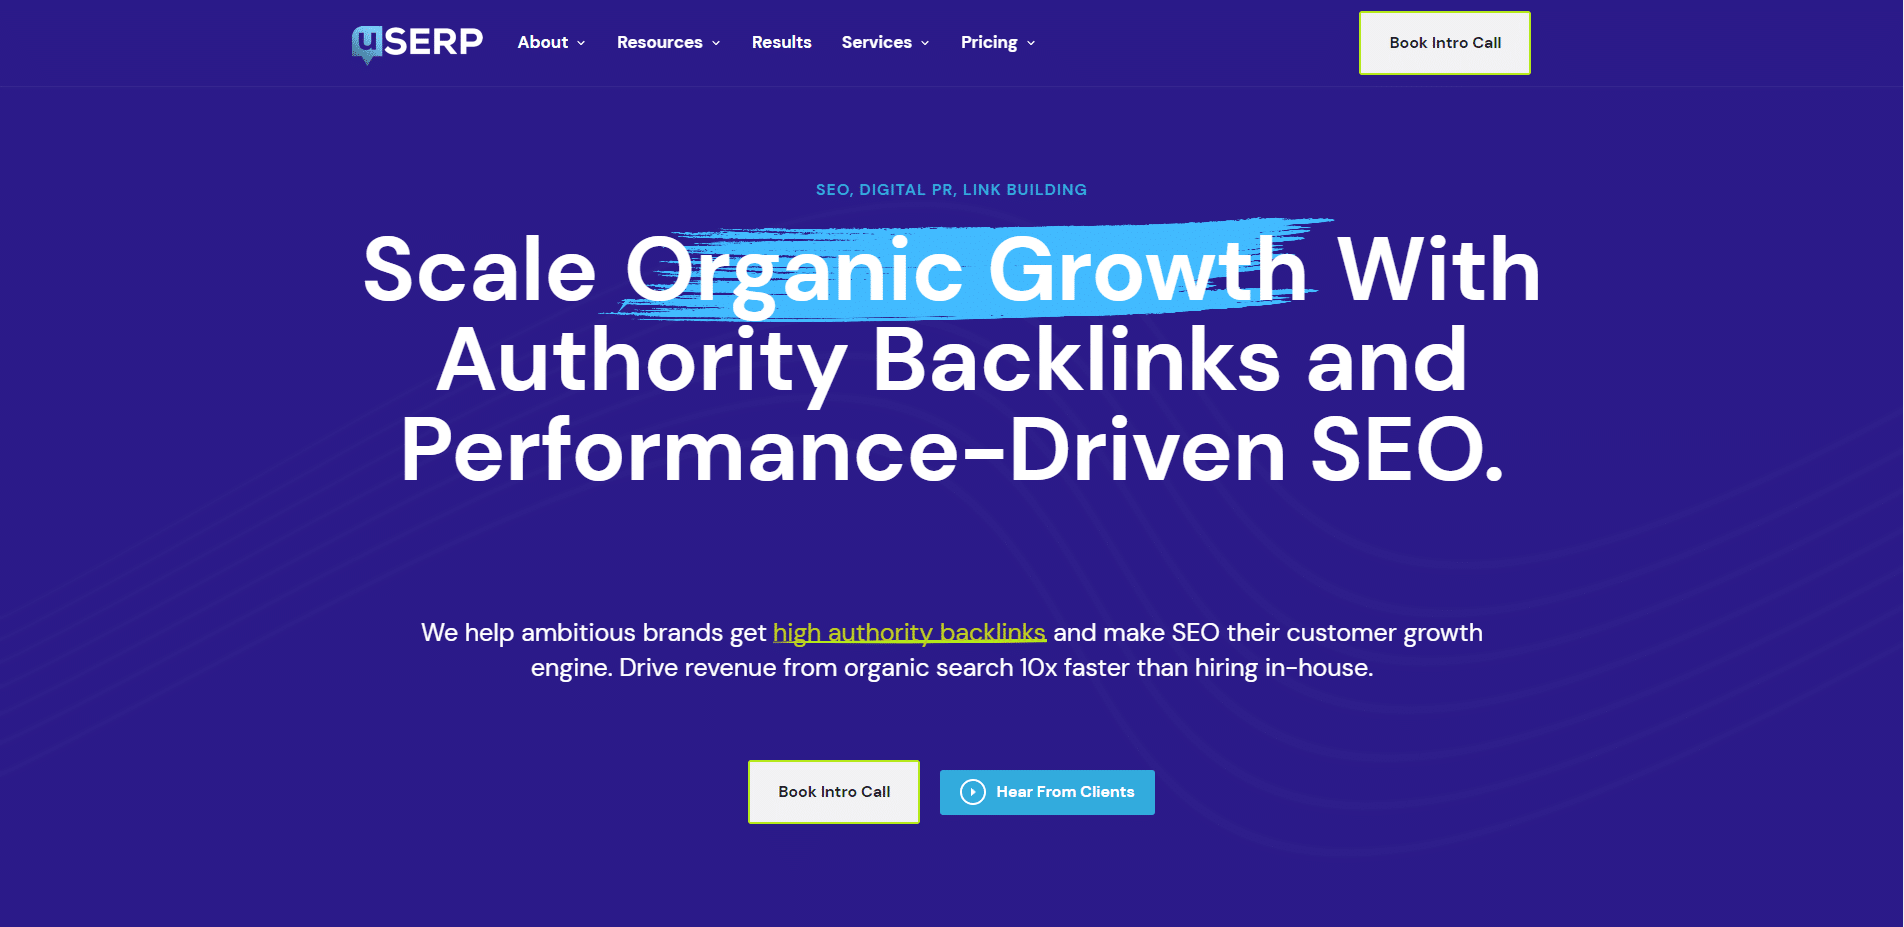 userp.io one of the best link building companies and agencies